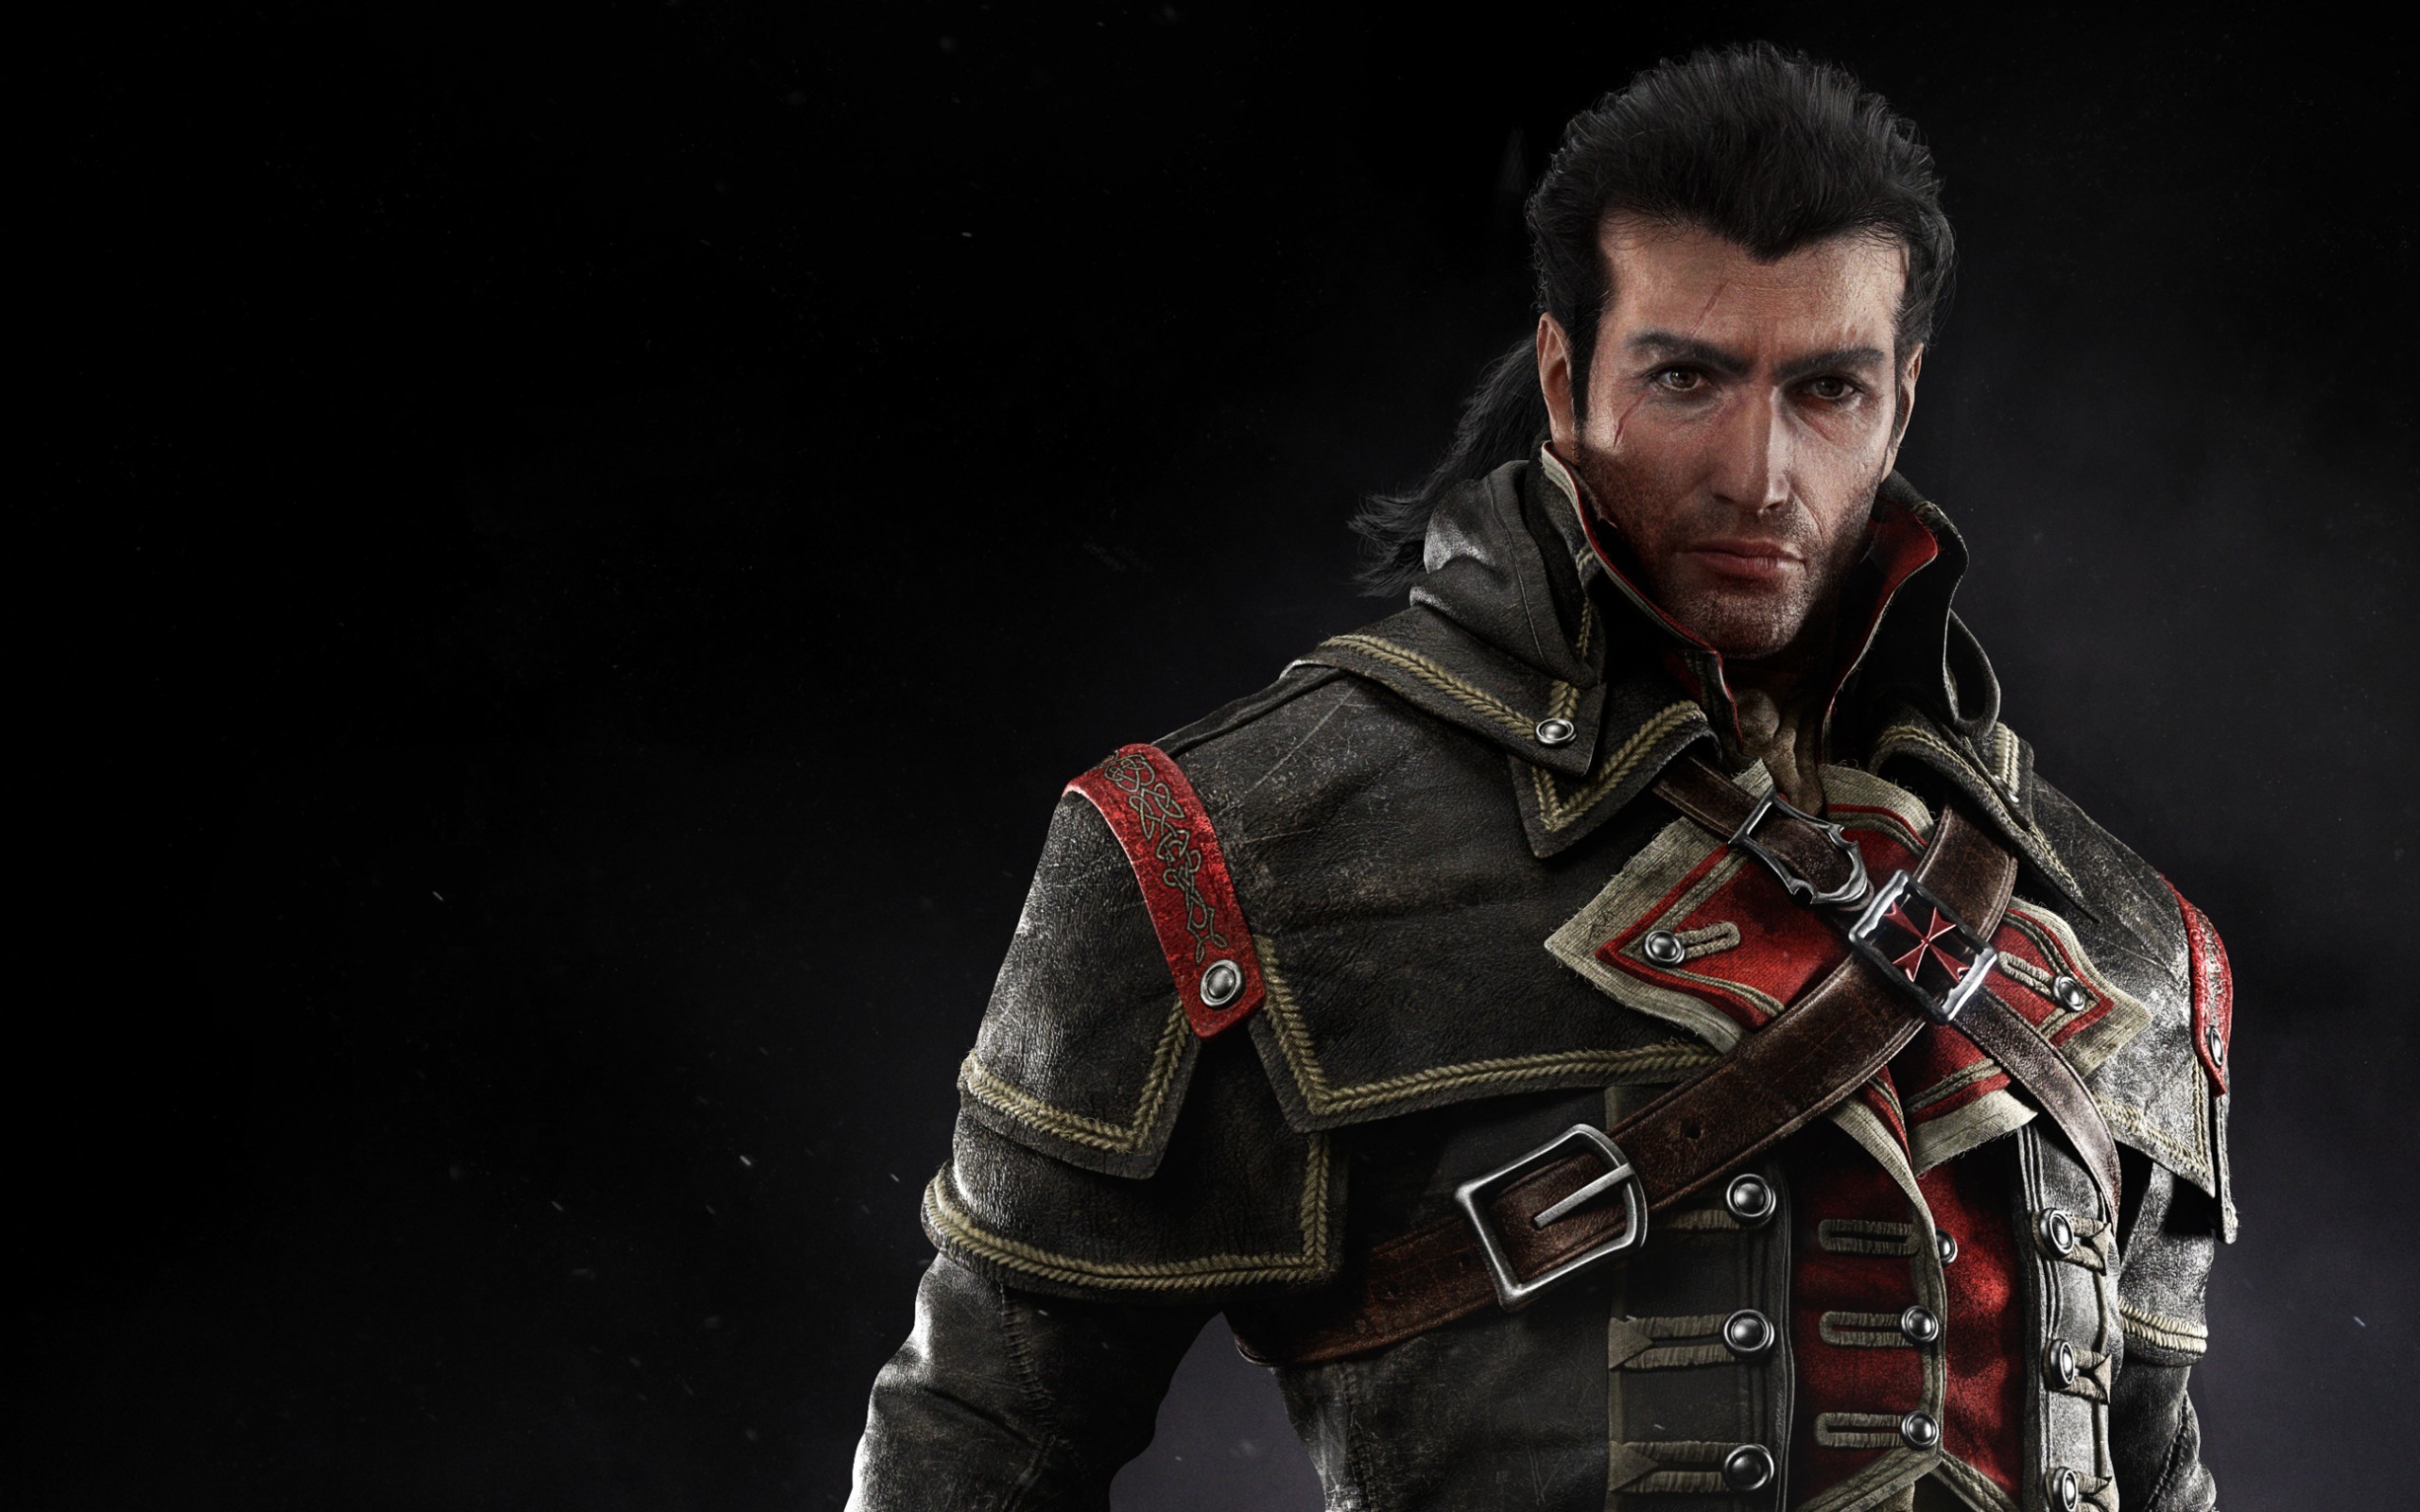 2560x1600 Assassin's Creed Rogue Wallpaper 2014 Video Game Character Shay Cormac. Â«